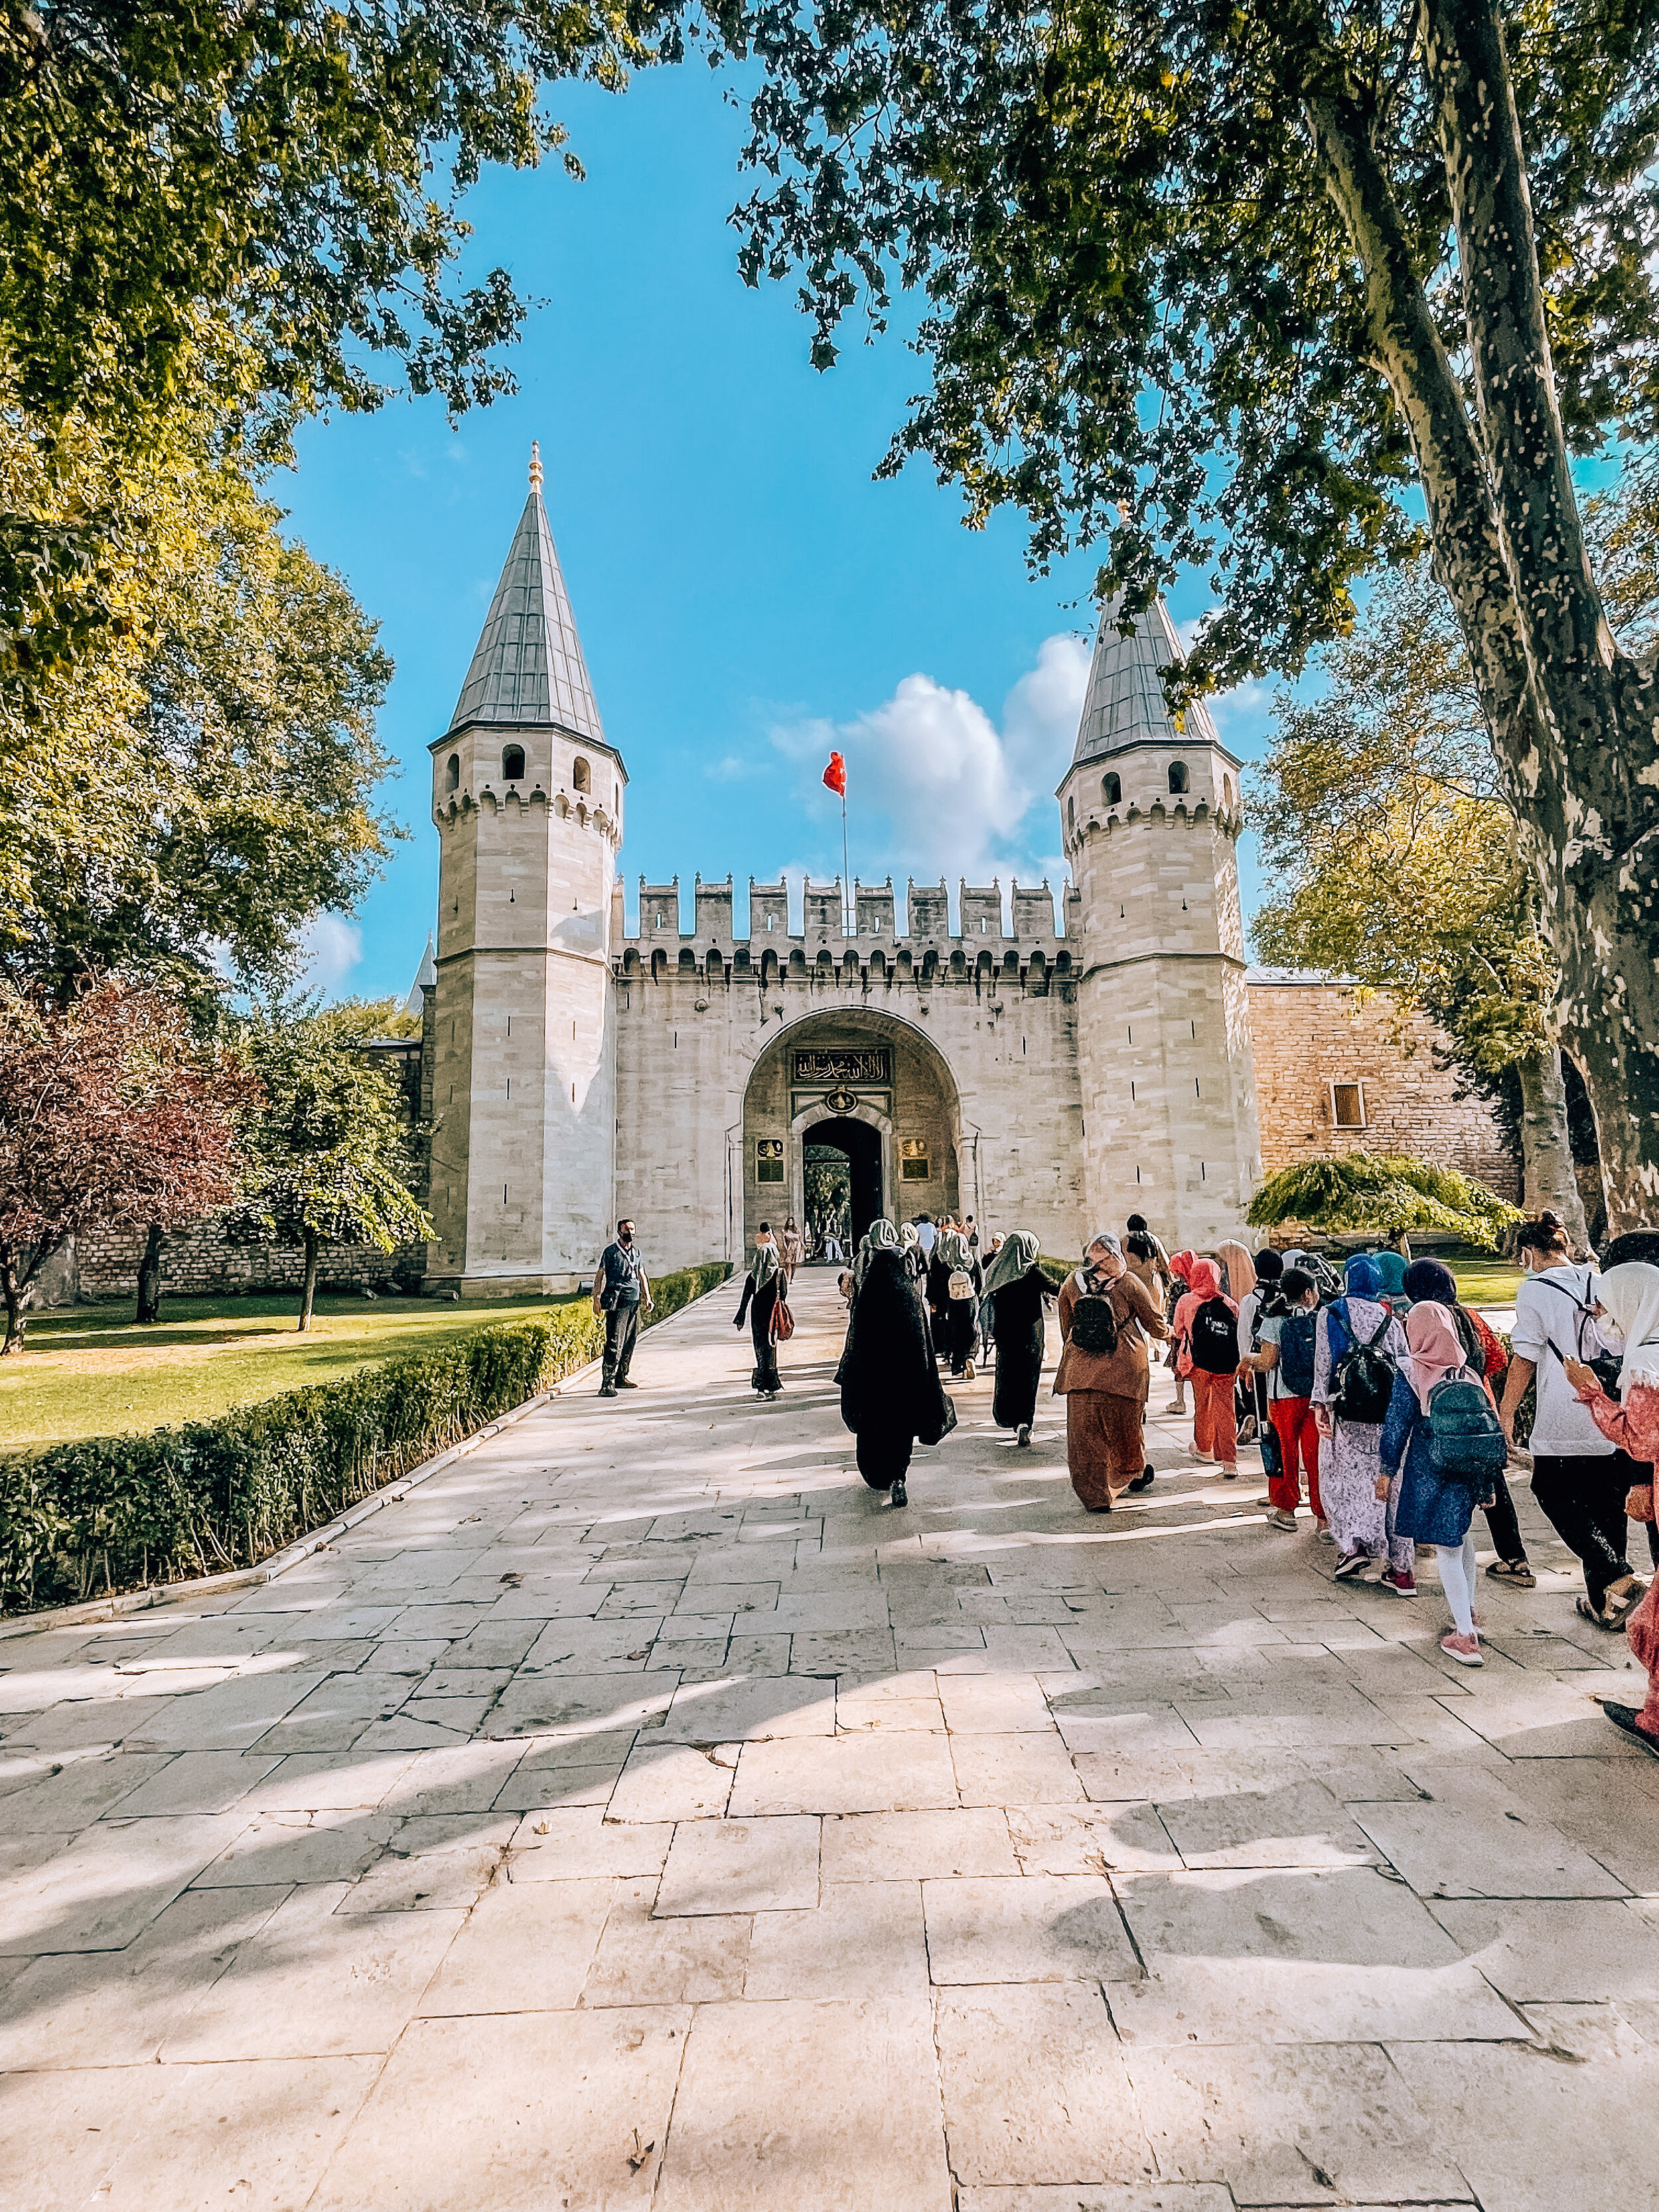 What to see in Istanbul - Topkapi Palace